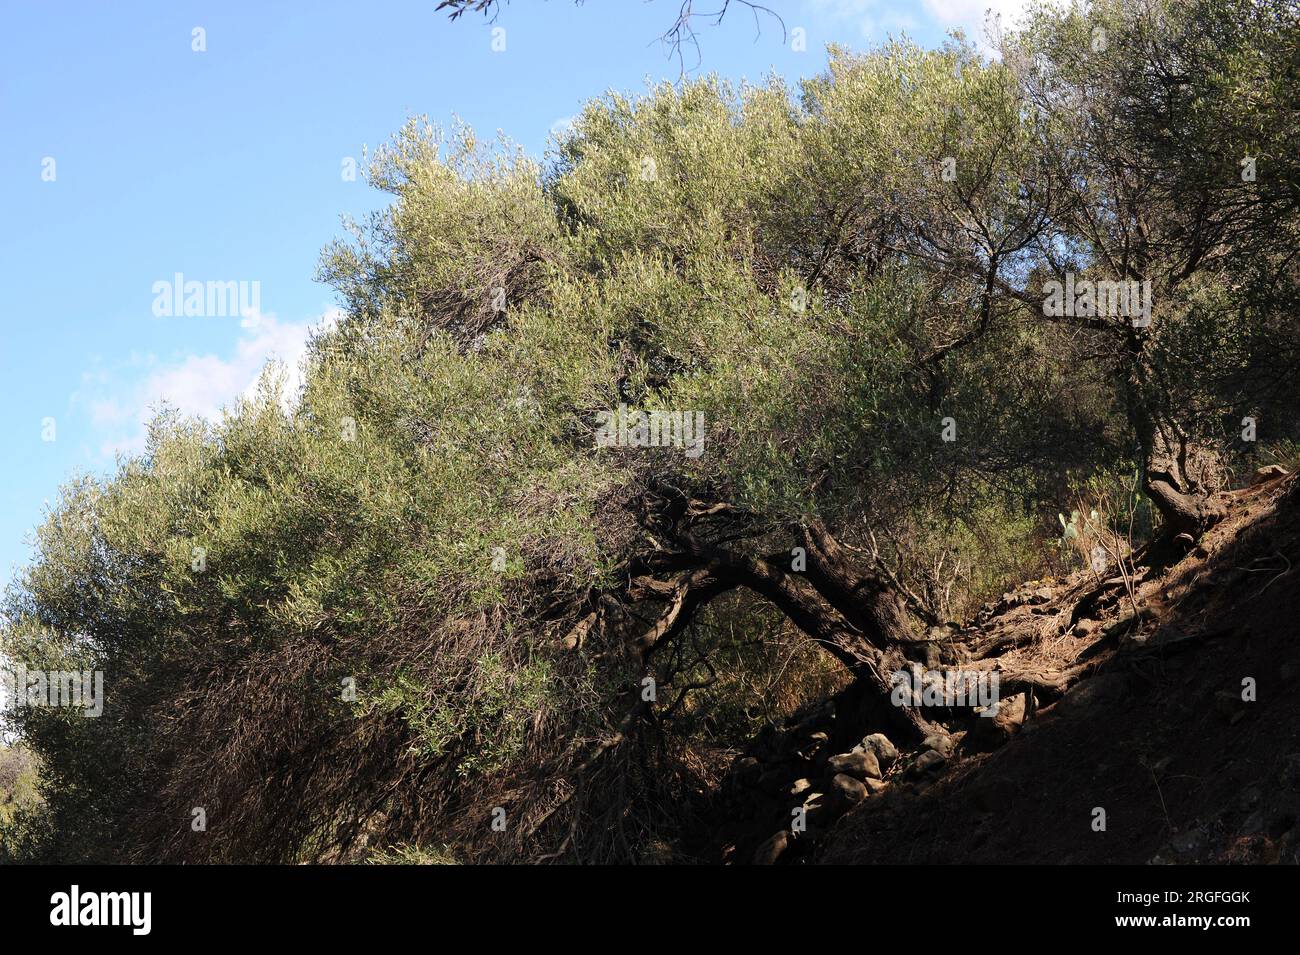 Acebuche canario or olivillo (Olea cerasiformis or Olea europaea ssp. guanchica) is a little tree endemic of Canary Islands, Spain. This photo was tak Stock Photo